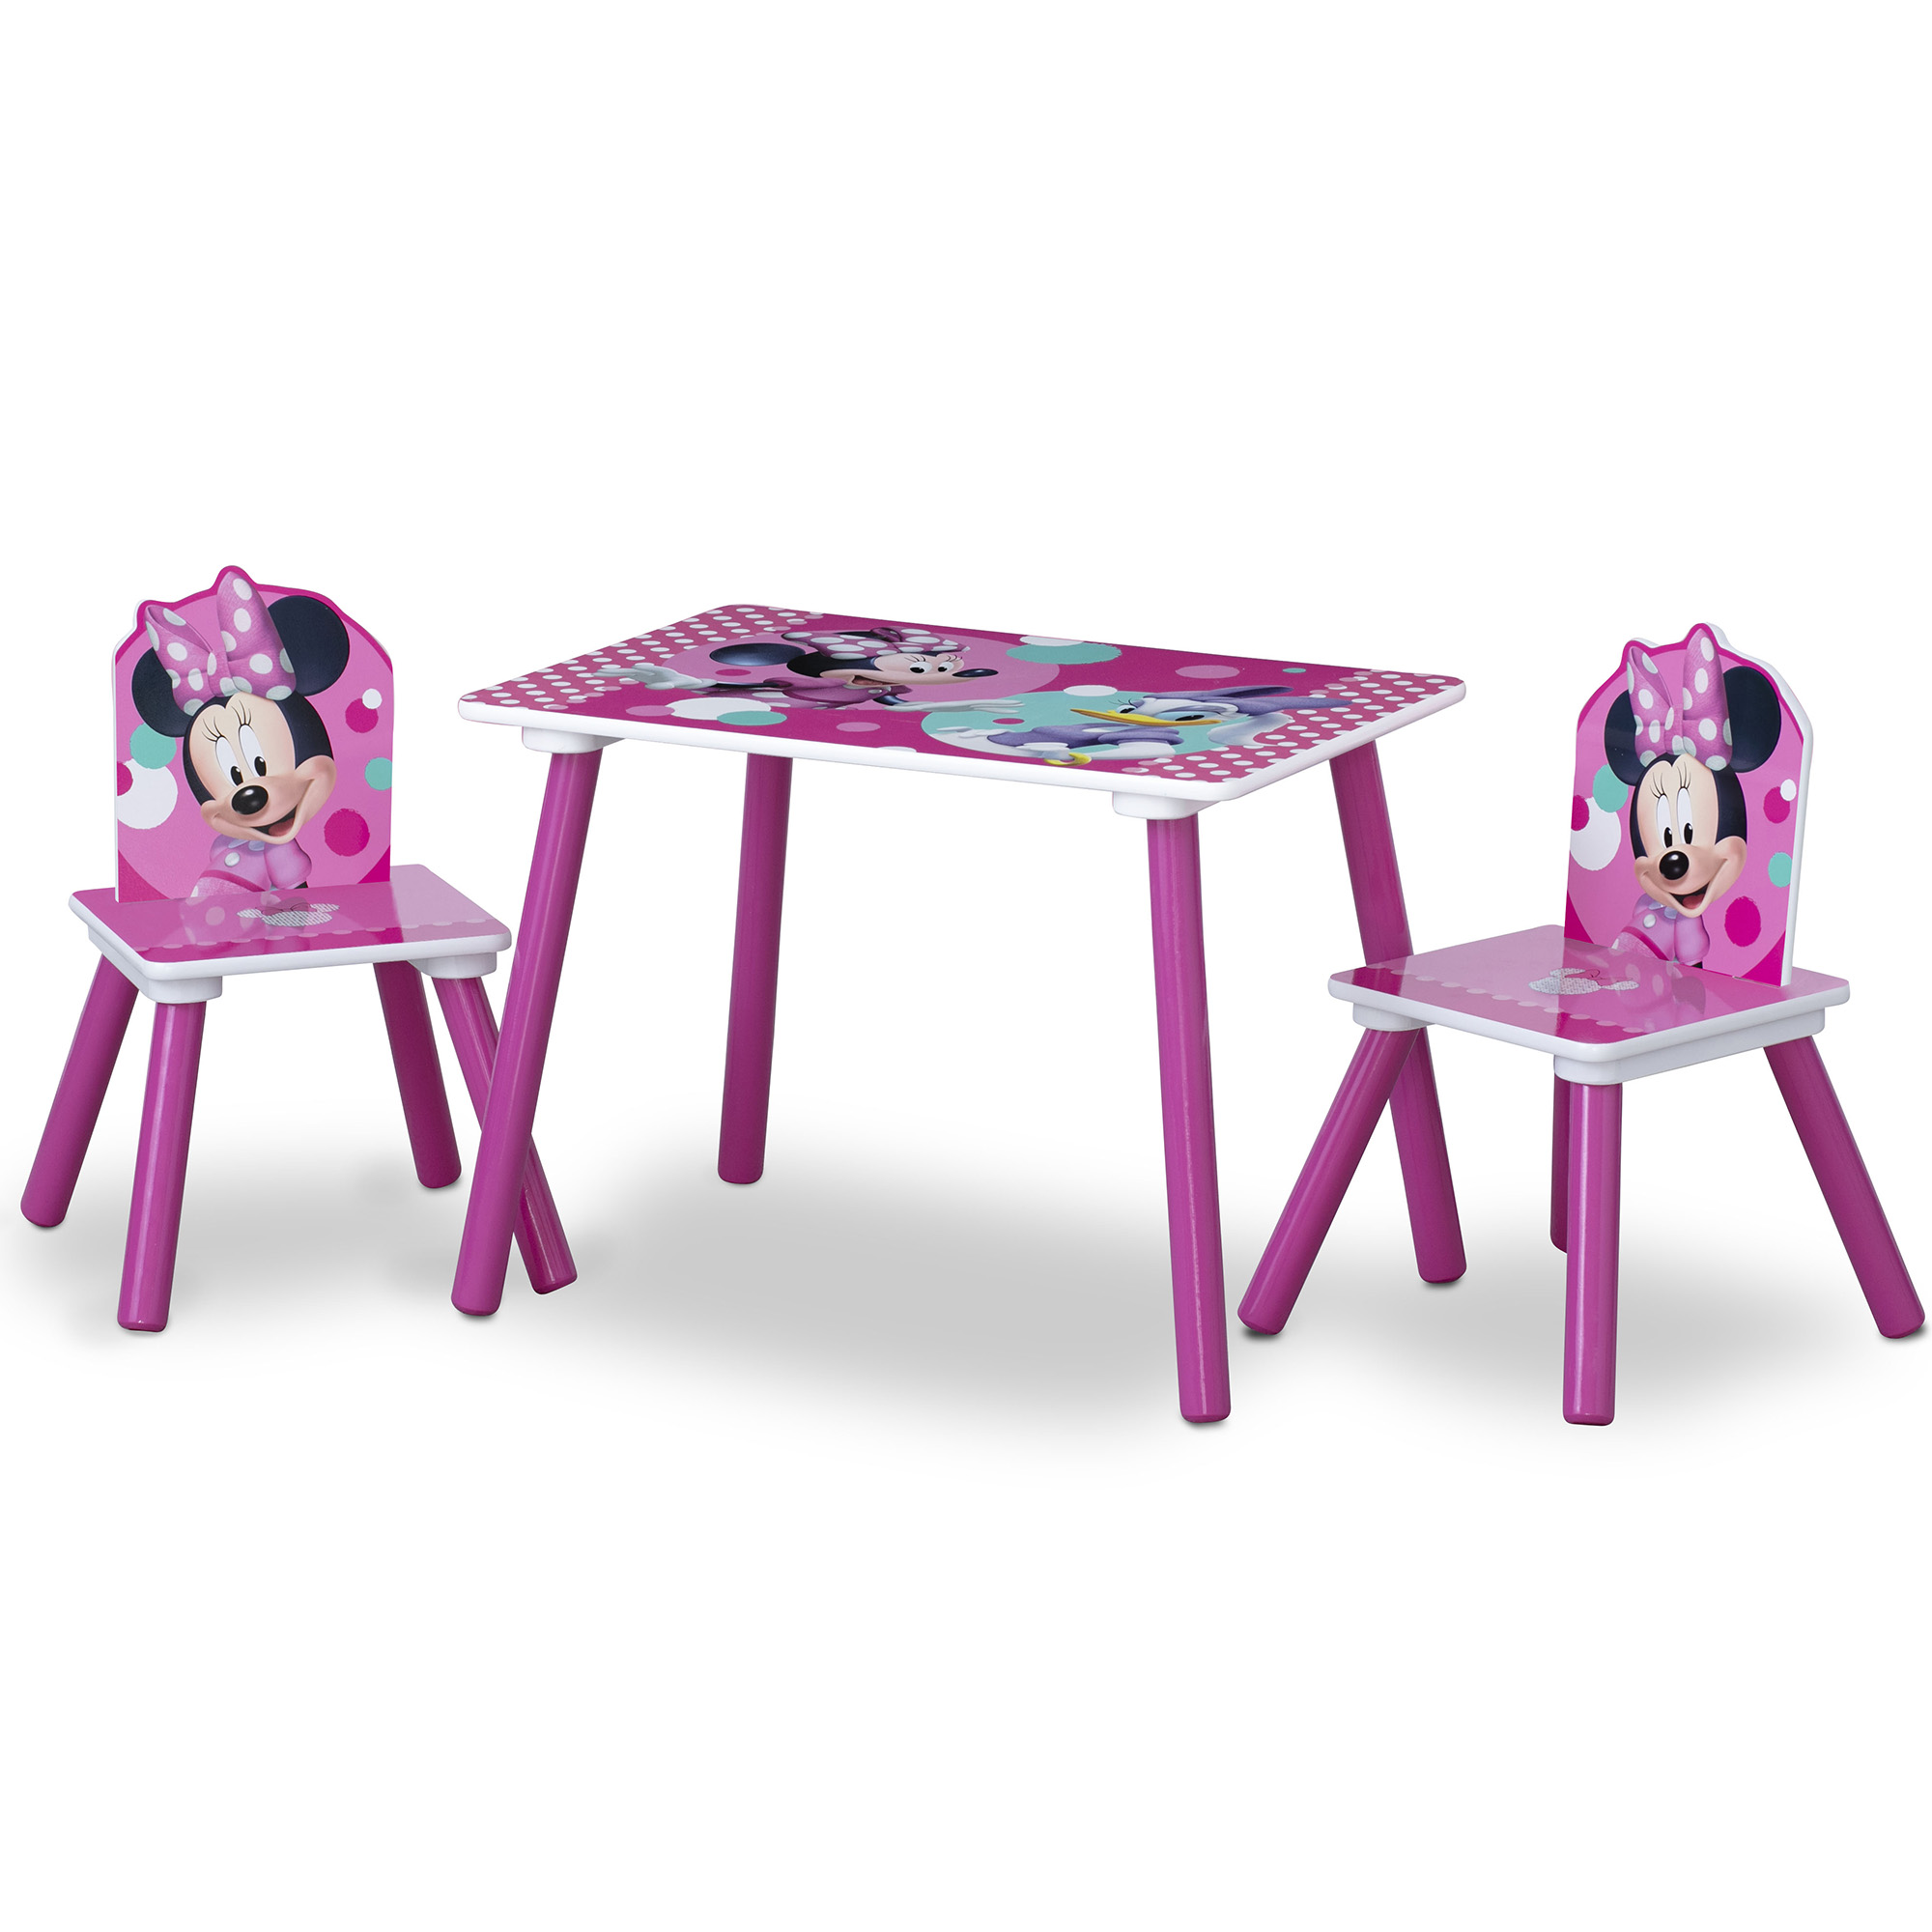 Minnie Mouse 4-Piece Wood Toddler Playroom Set – Includes Table, 2 Chairs & Toy Bin, Pink - image 6 of 13